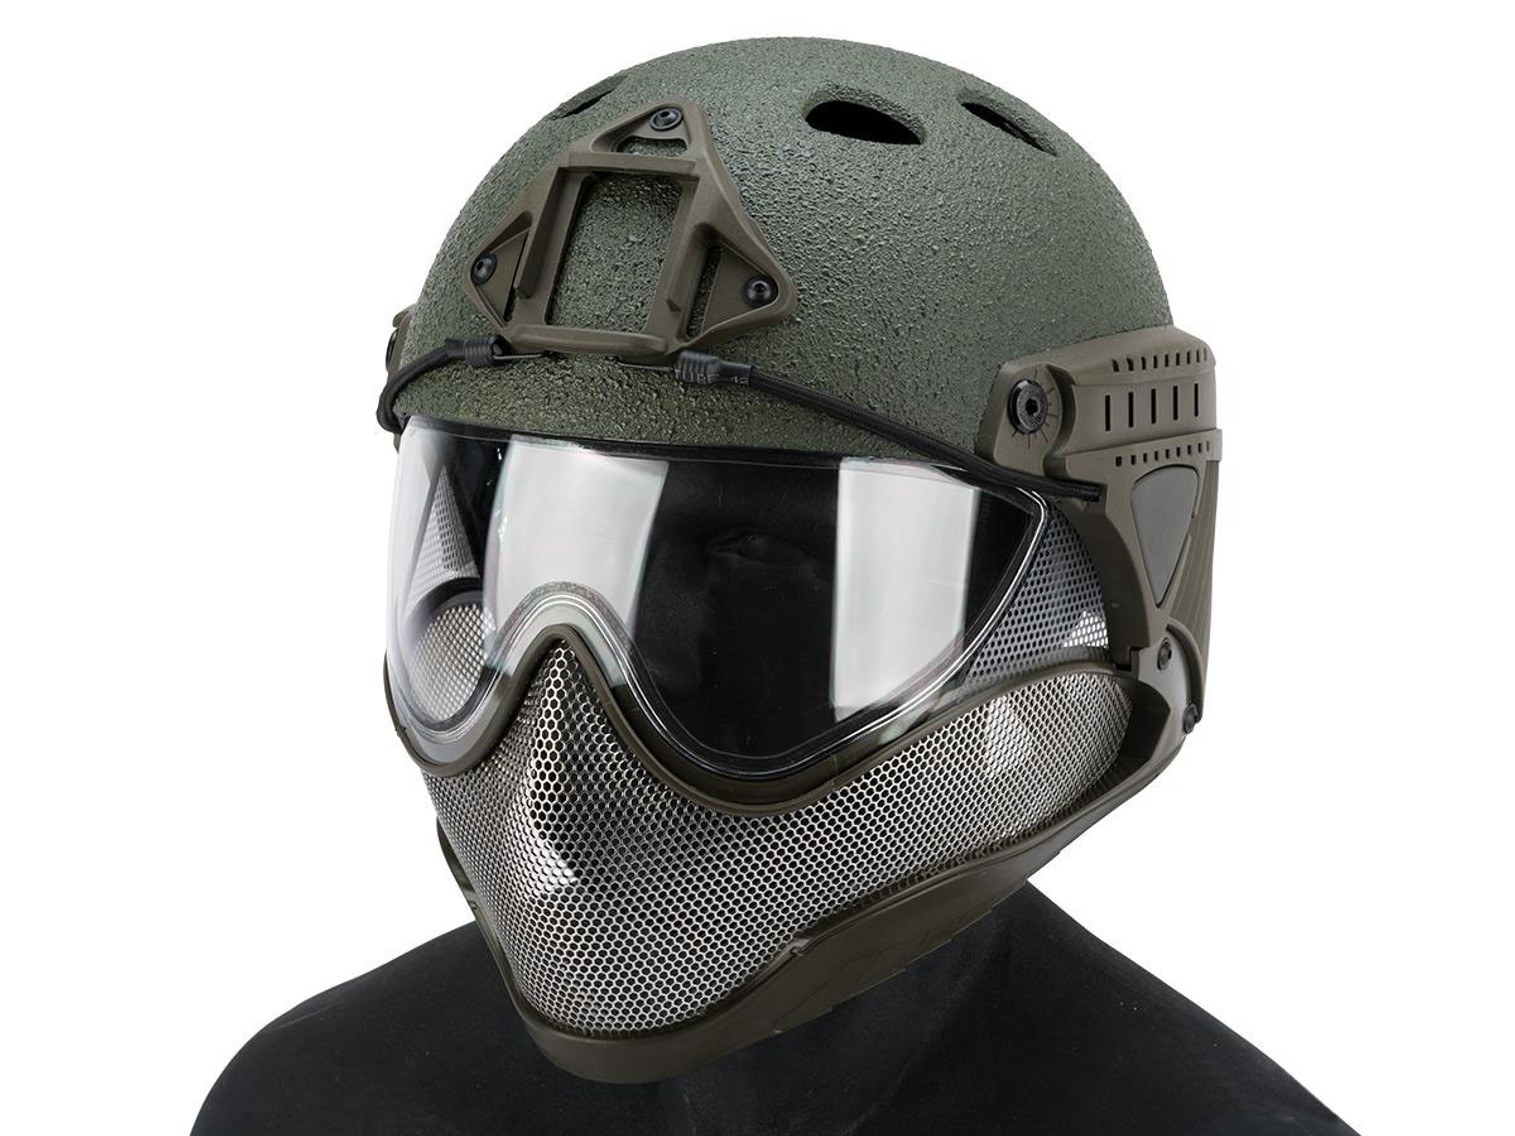 WARQ Full Face Protection "Raptor" Helmet System (Color: OD Green / Clear Lens)